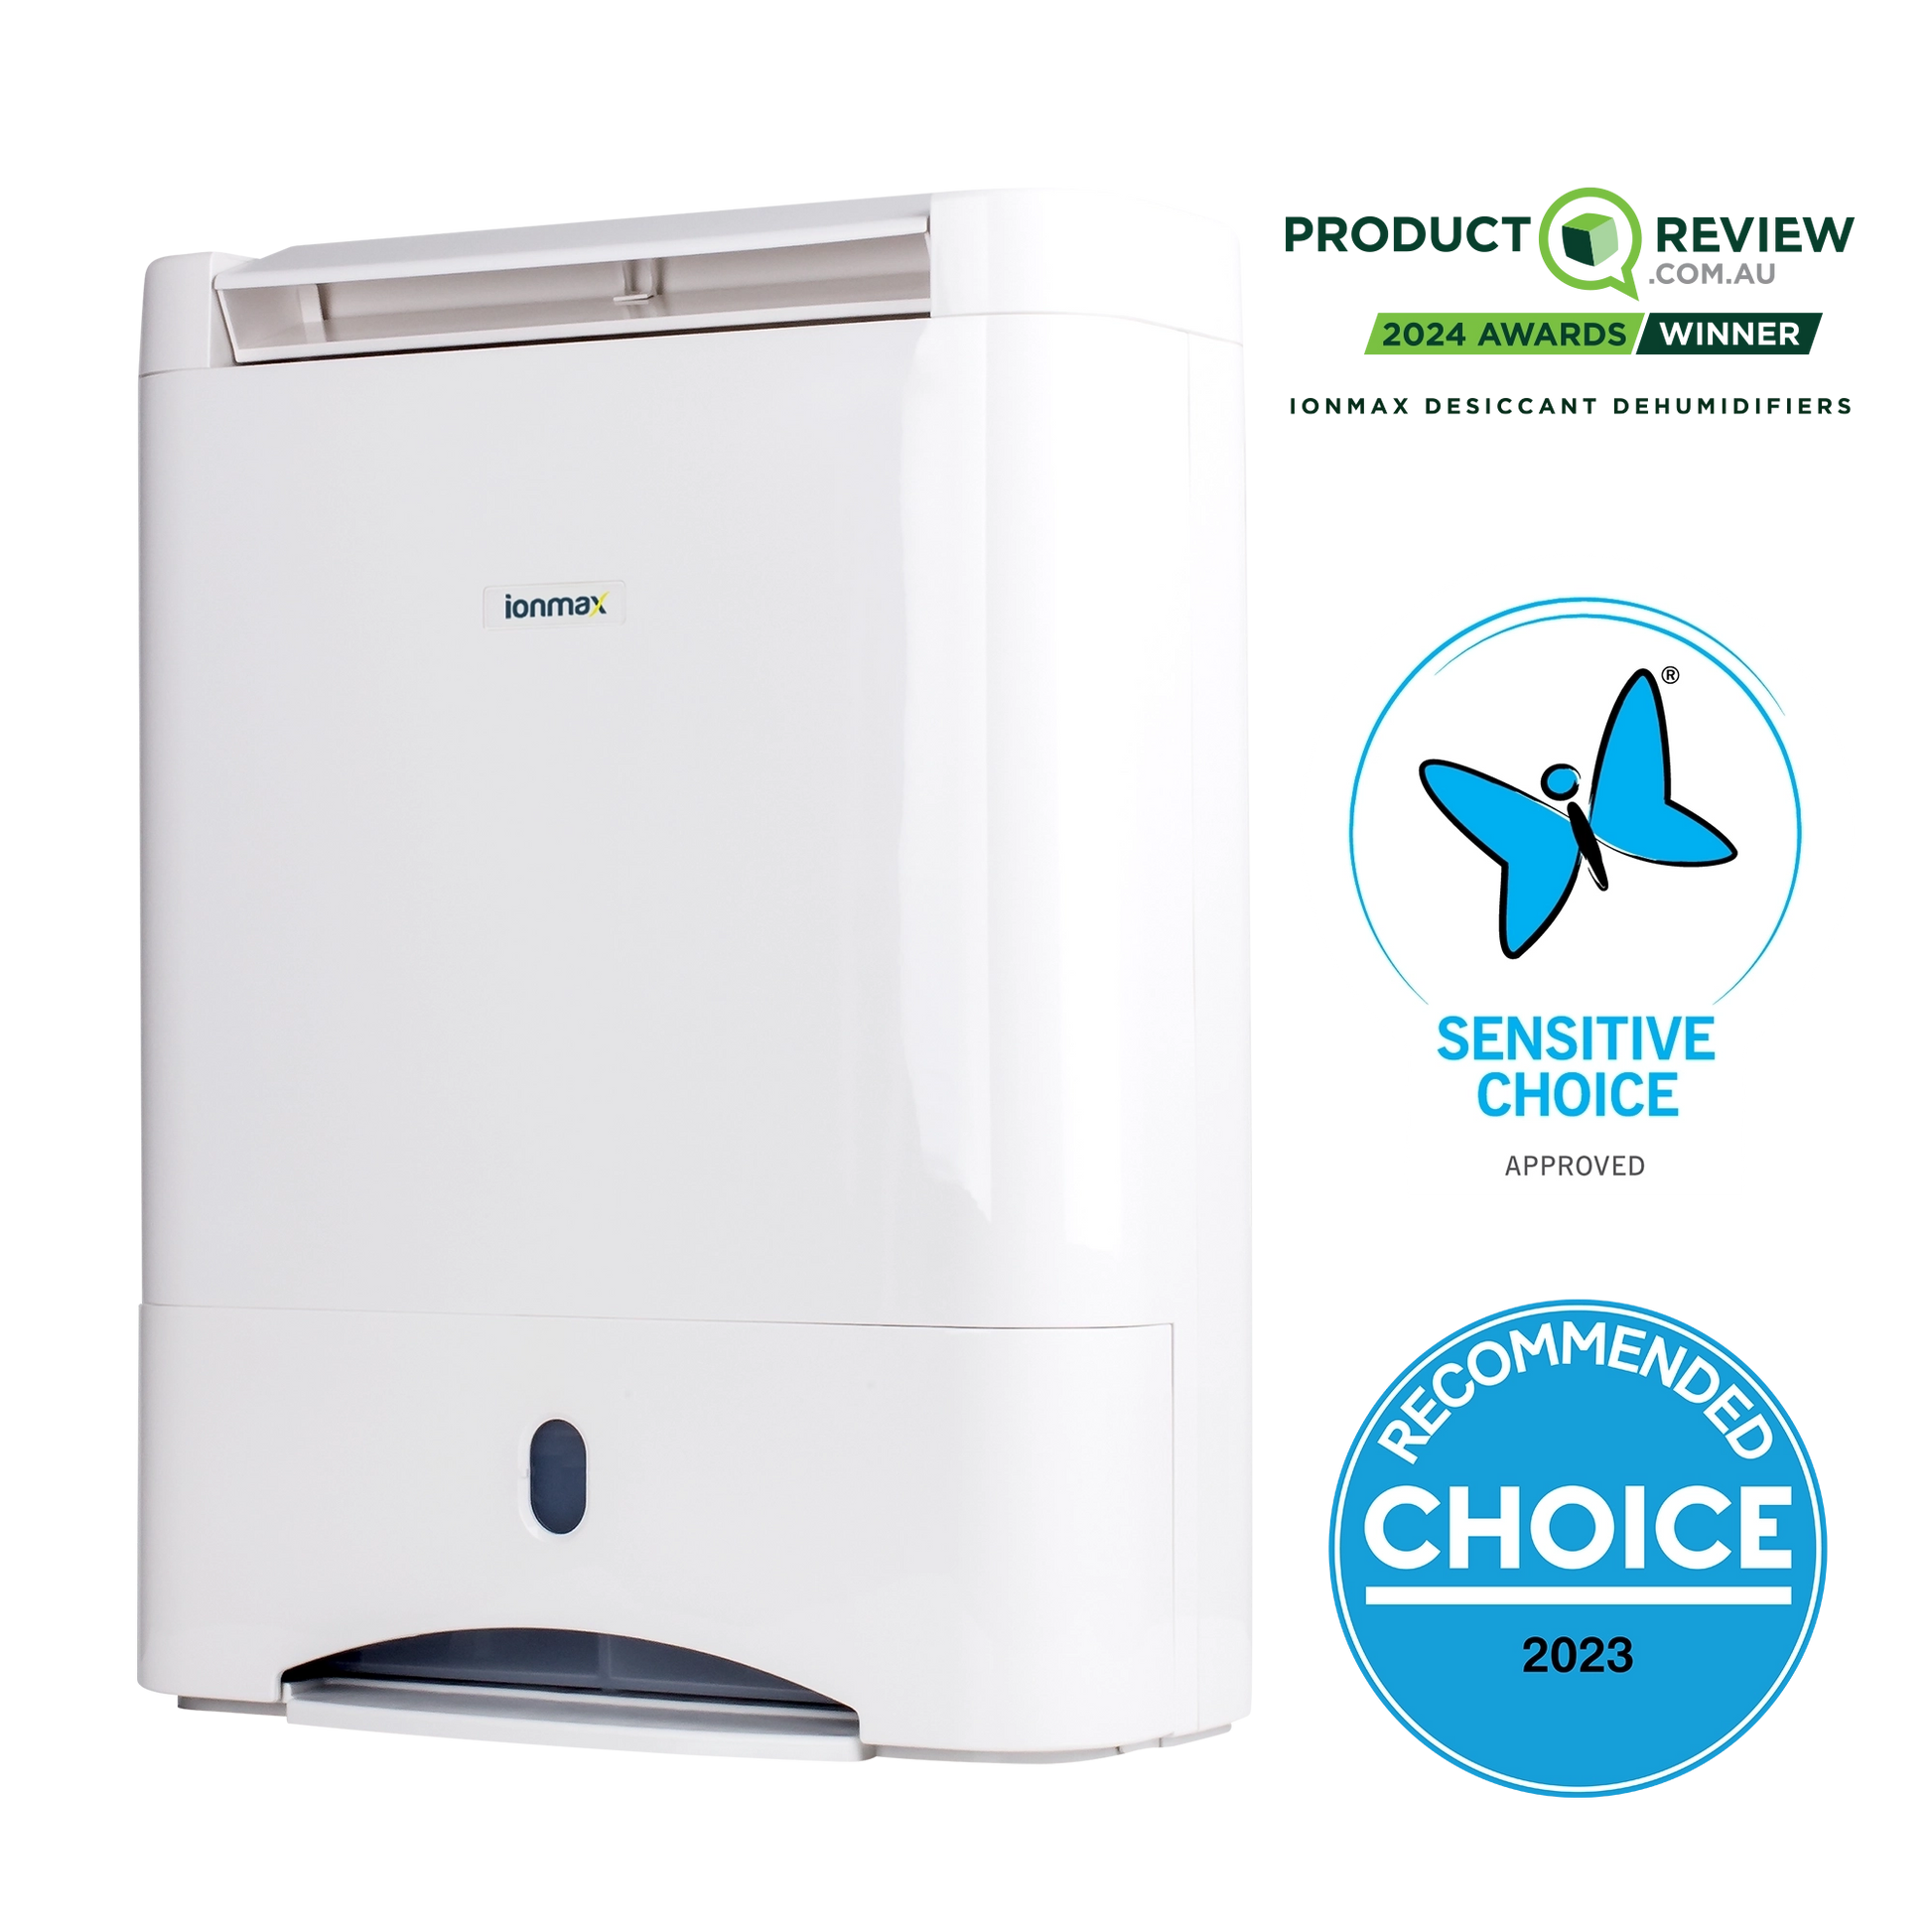 Ionmax ION632 10L/day desiccant dehumidifier - Sensitive Choice approved & Choice recommended